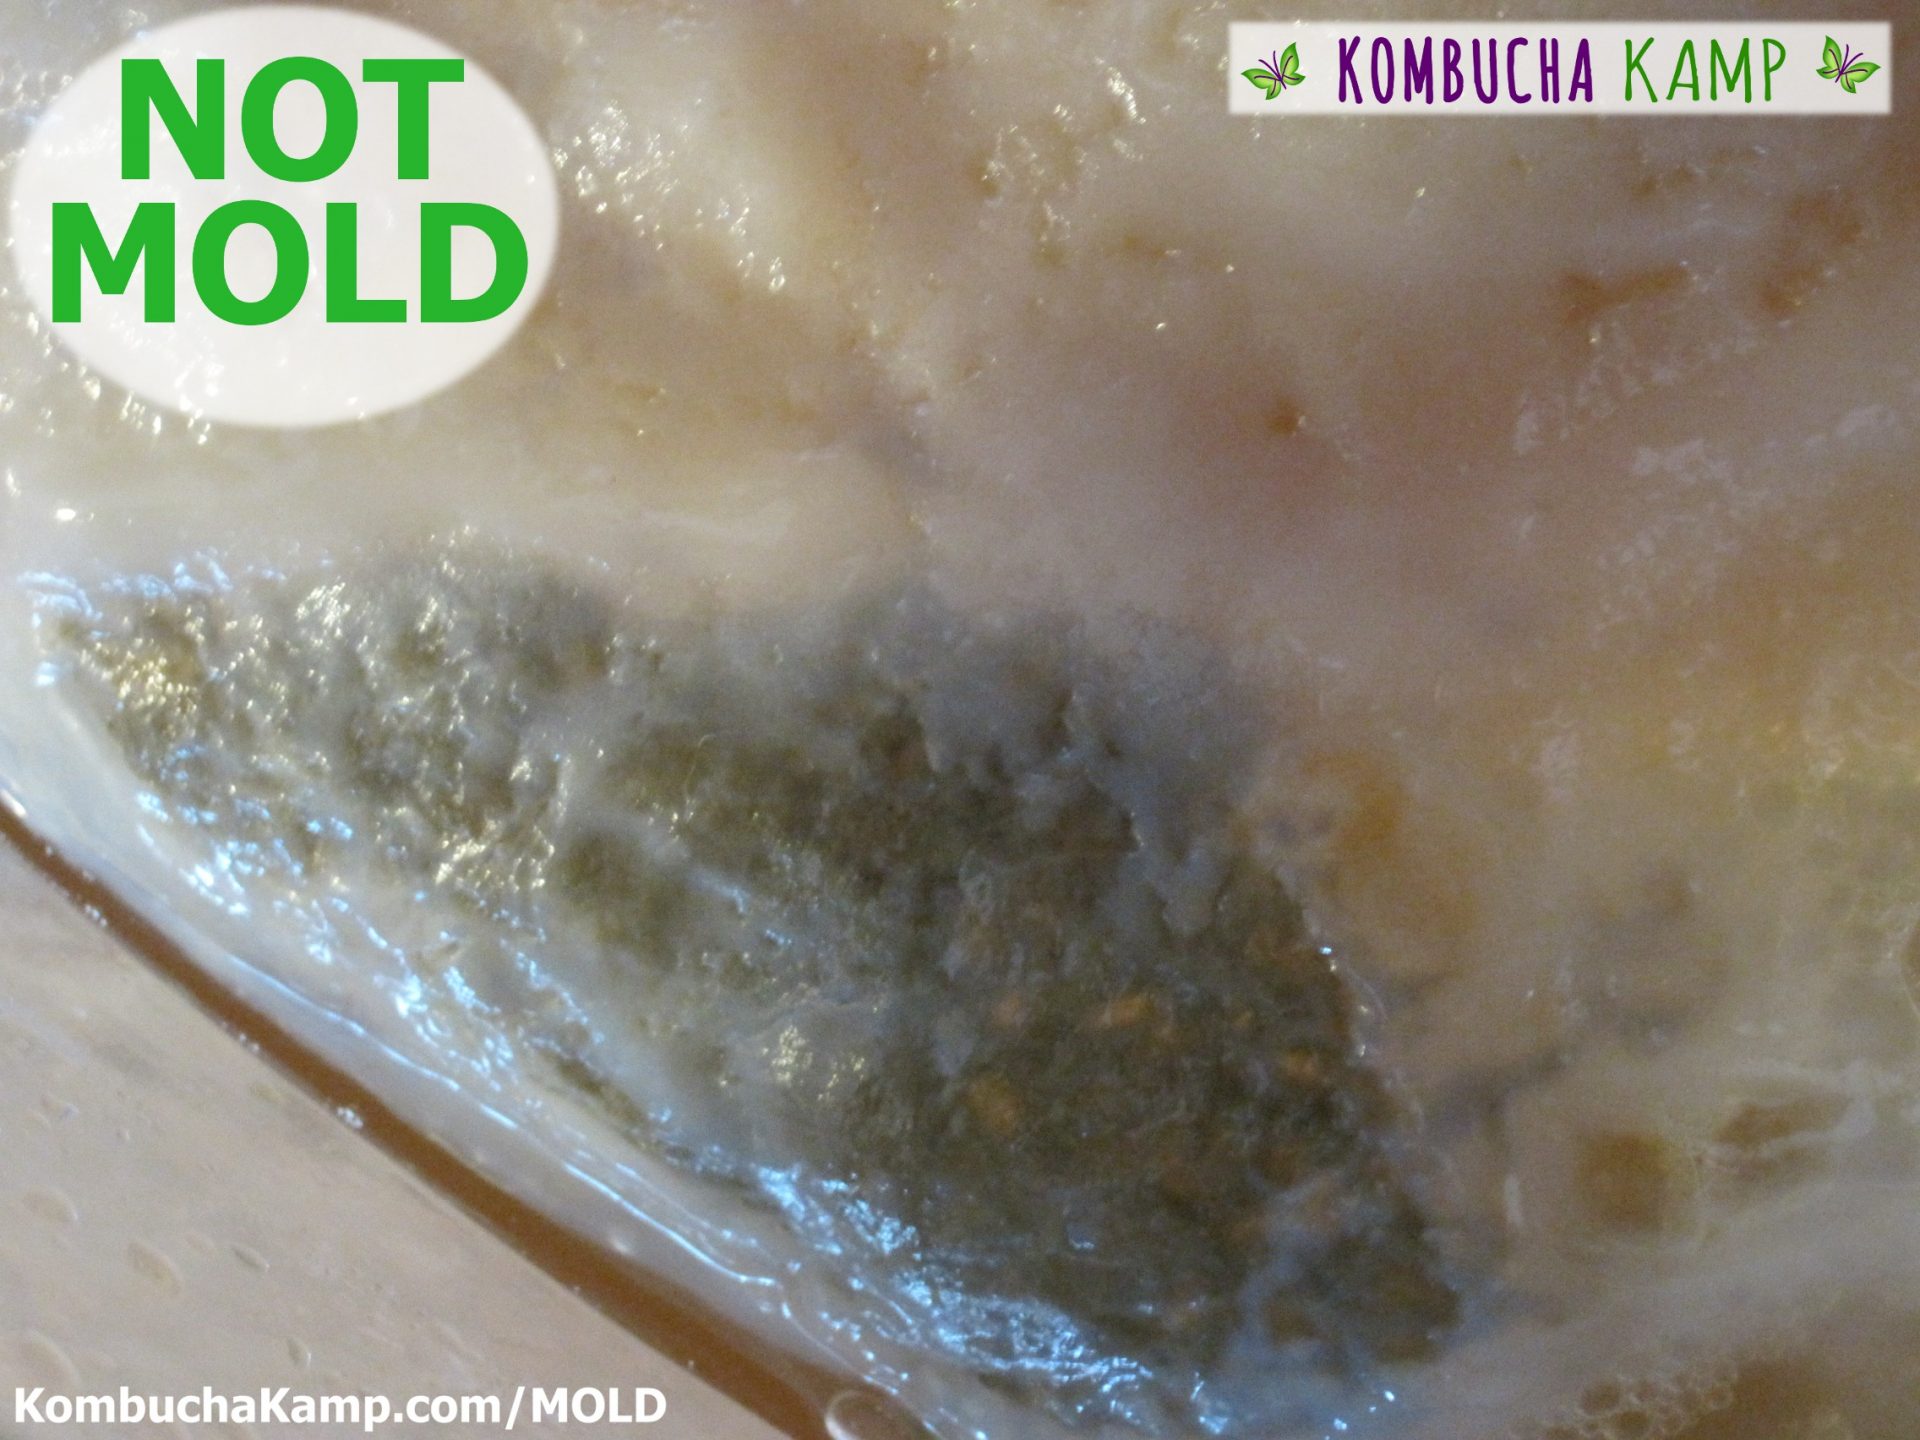 A dark green patch of yeast is being slowly covered by a new forming SCOBY in a healthy Kombucha brew not Mold